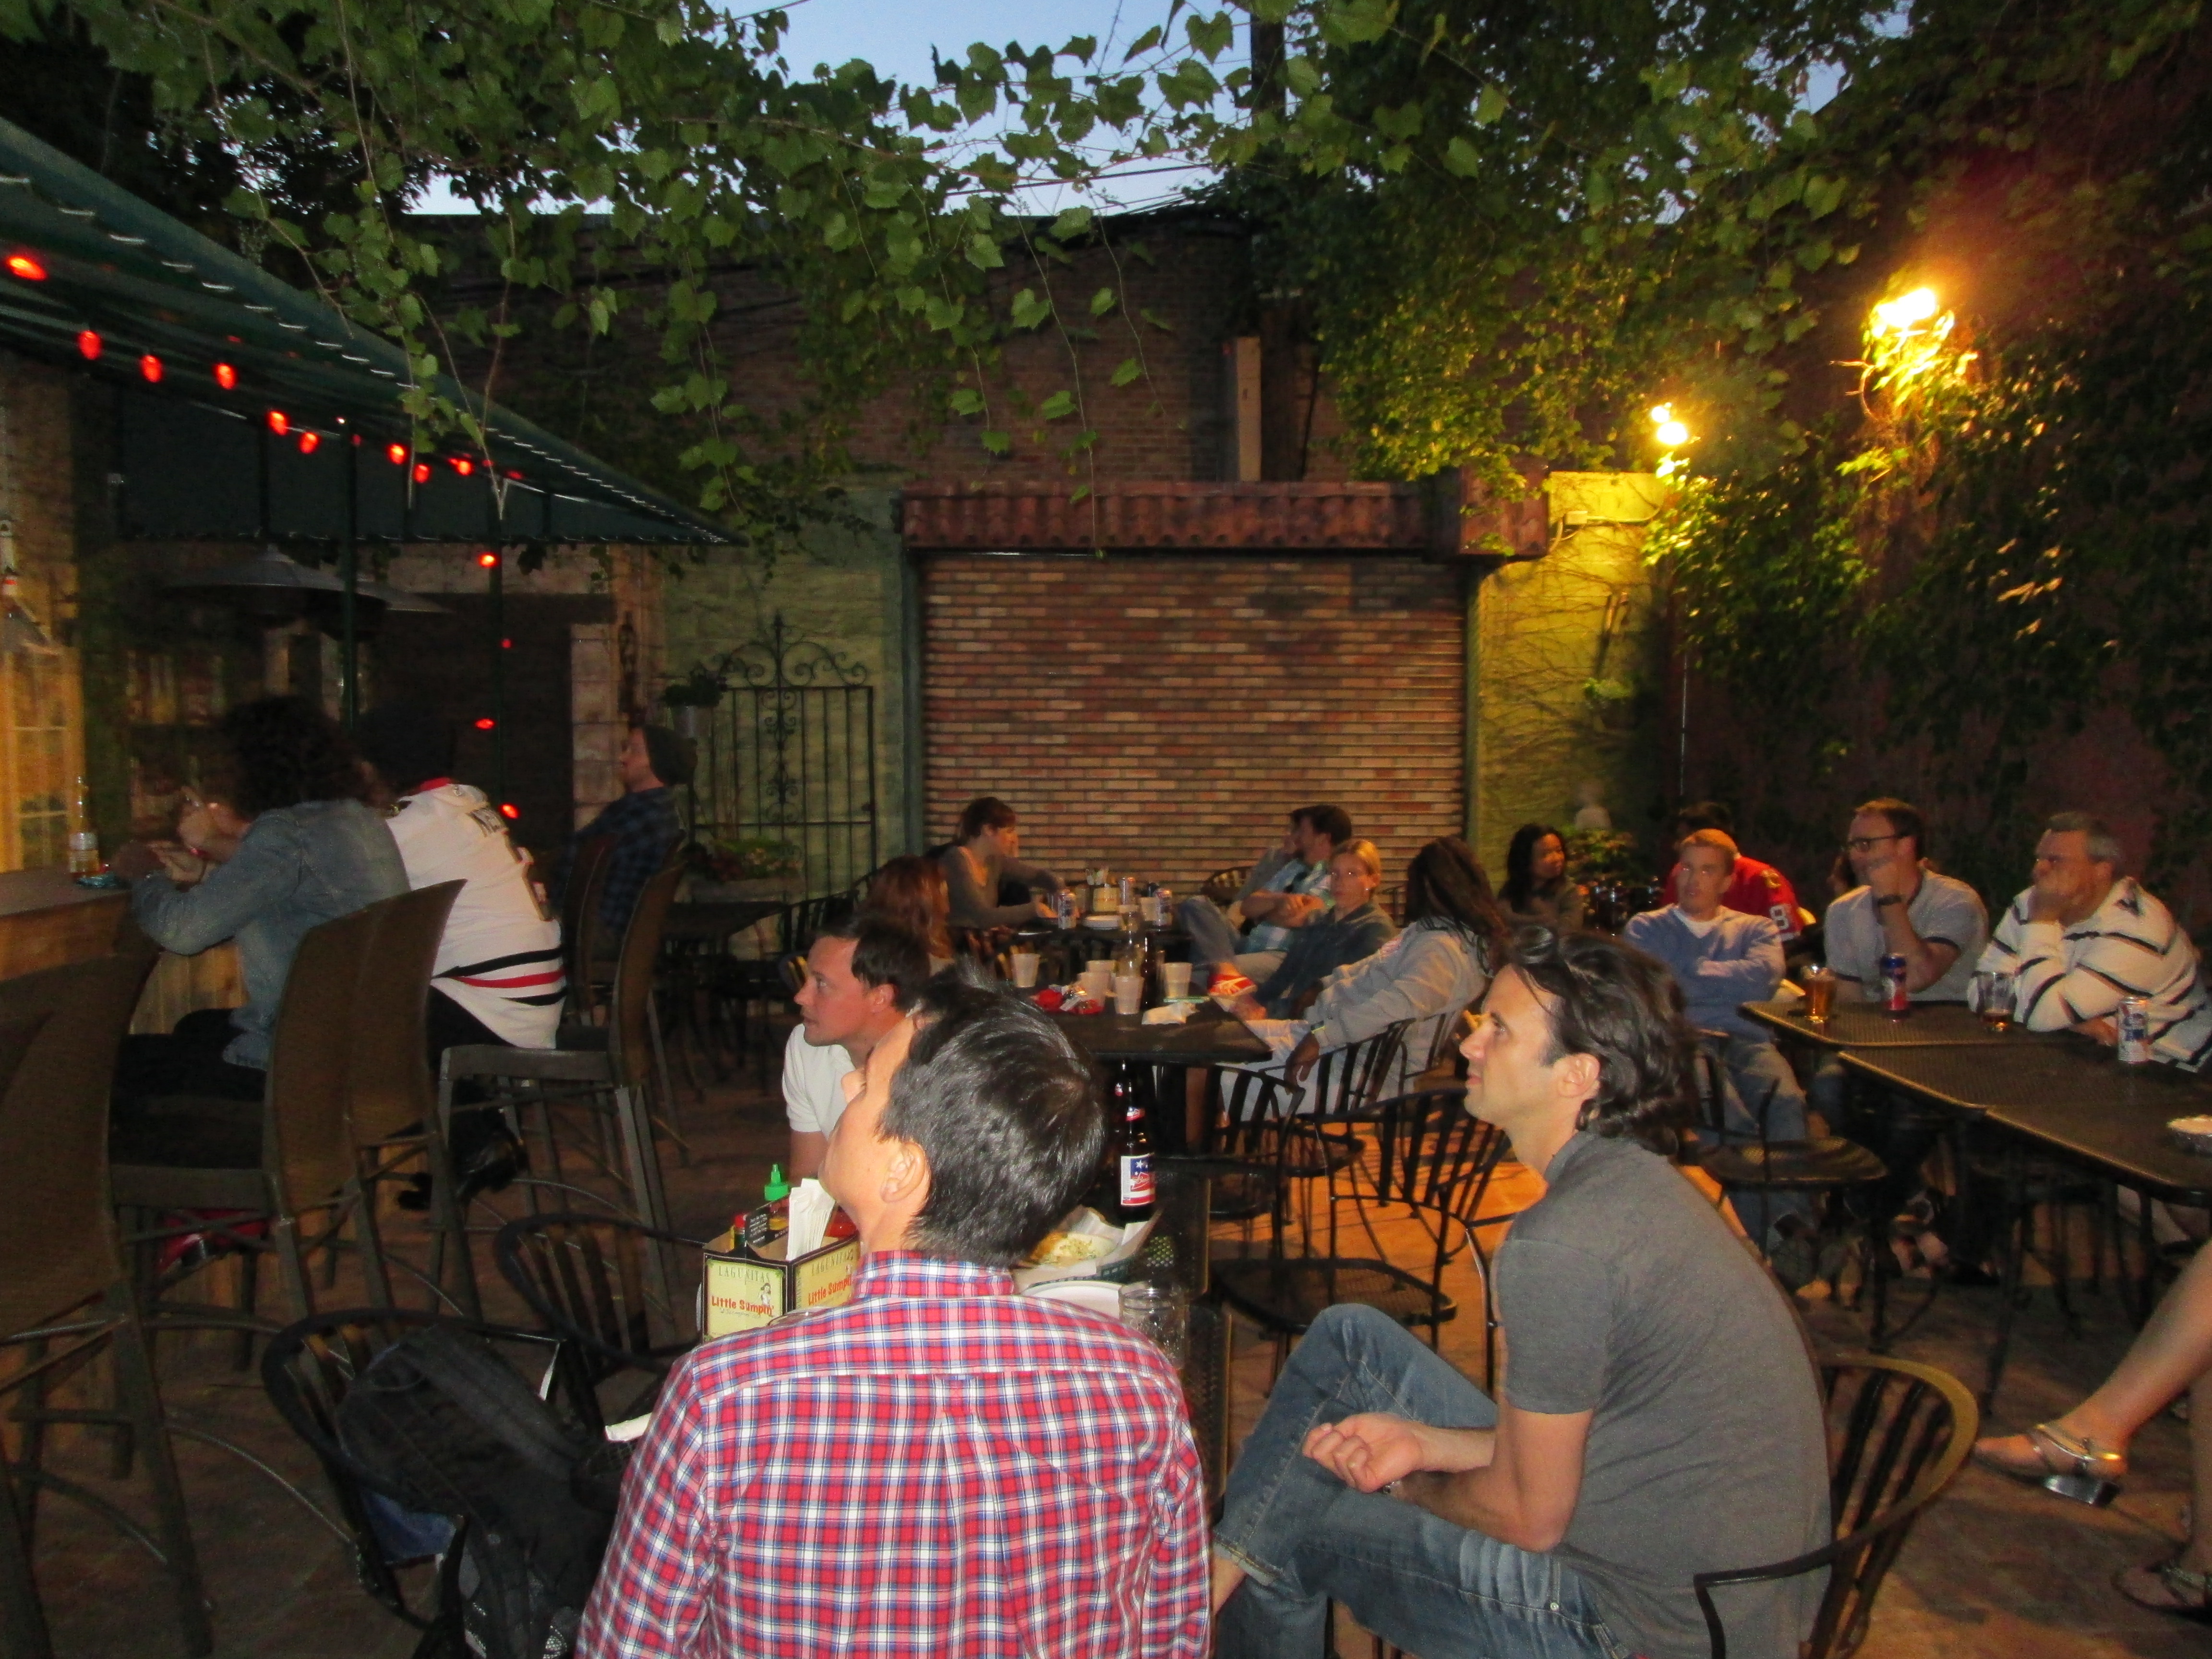 A Guide To Outdoor Drinking Our Favorite Beer Gardens And